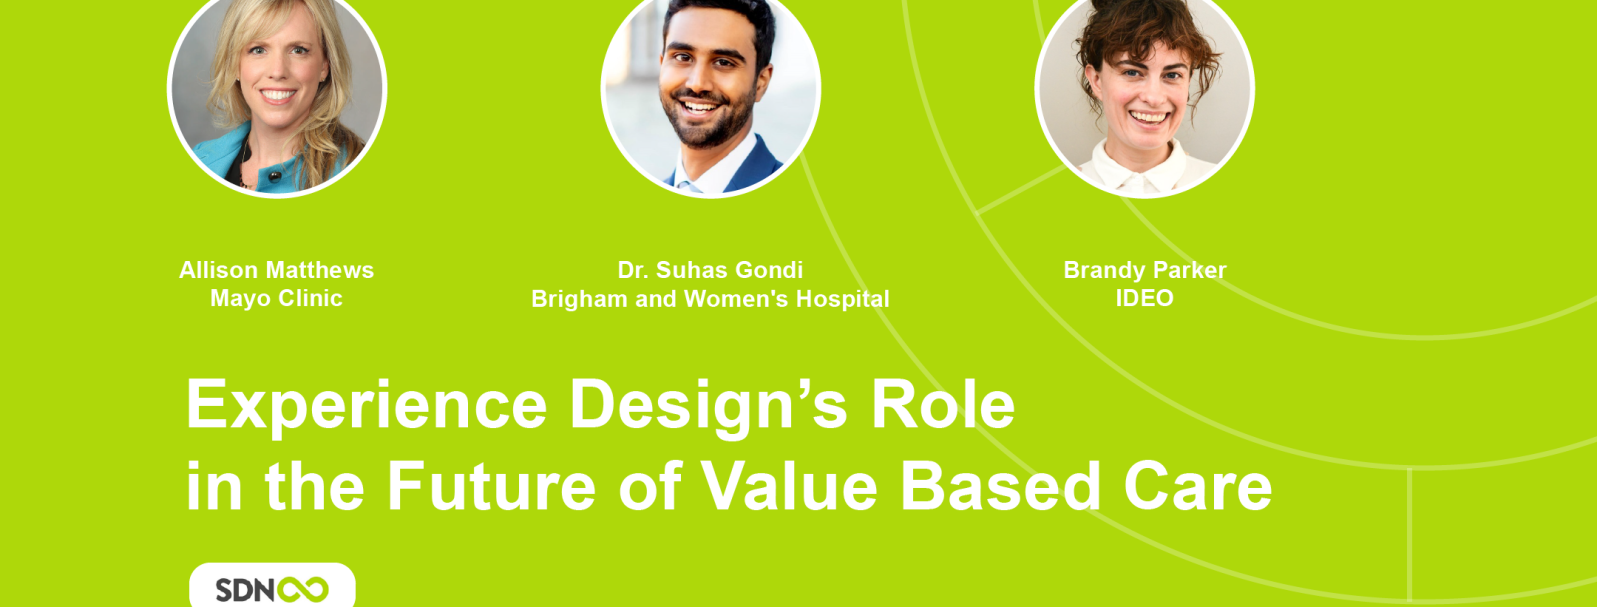 Experience Design's Role in the Future of Value Based Care